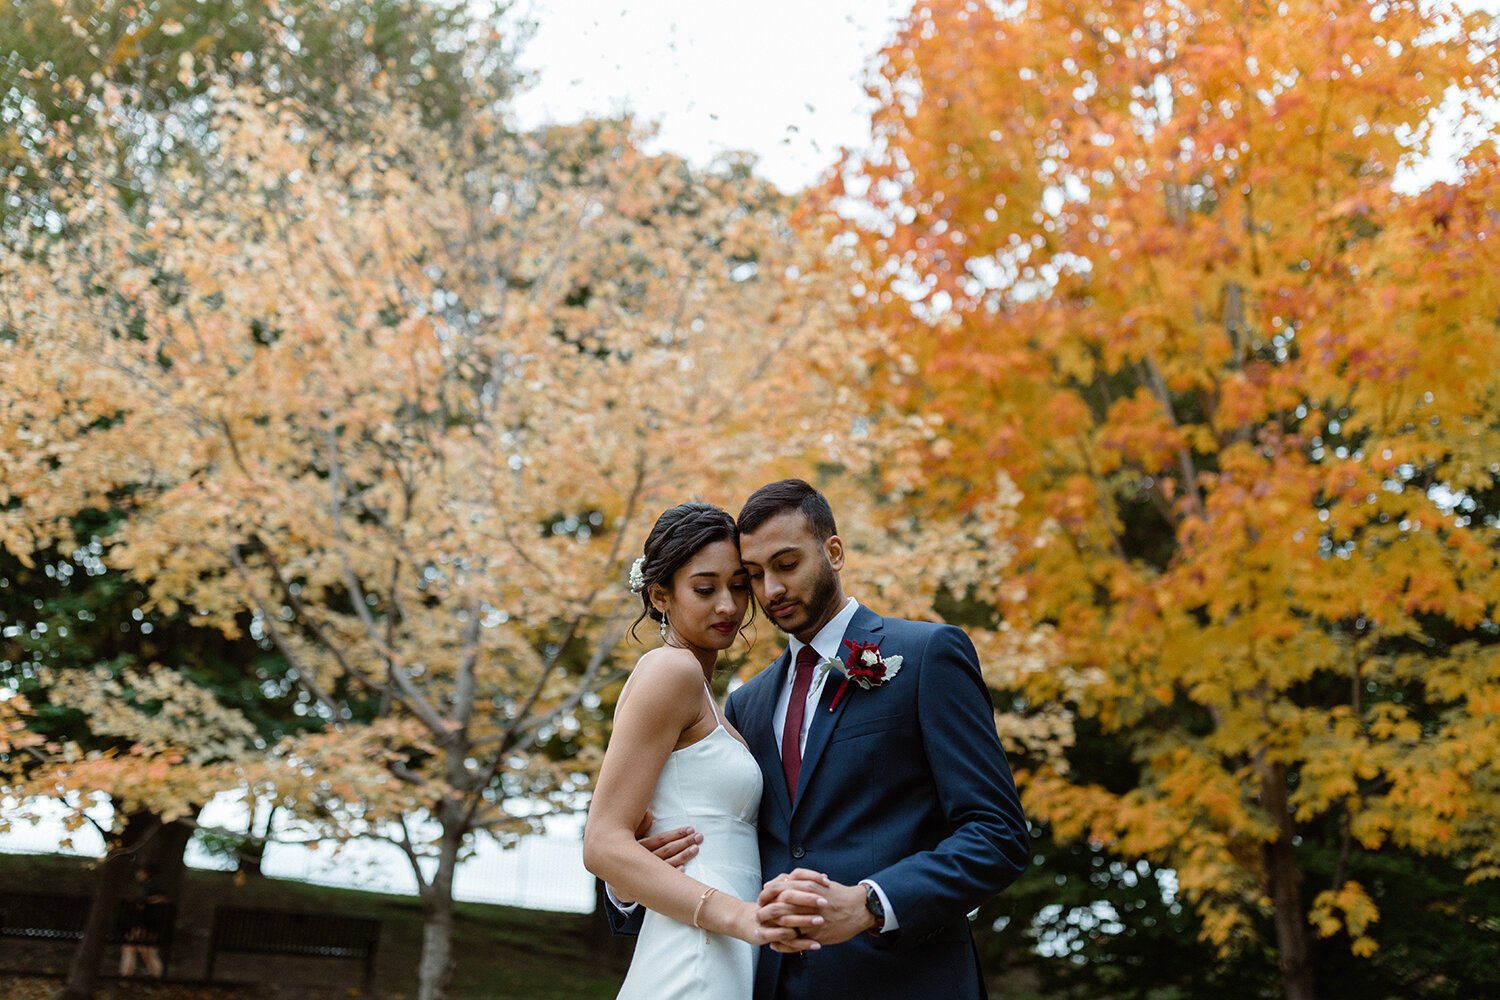 Small-Intimate-Elopement-Downtown-Toronto-U-of-T-Vows-where-to-elope-in-toronto-30.JPG